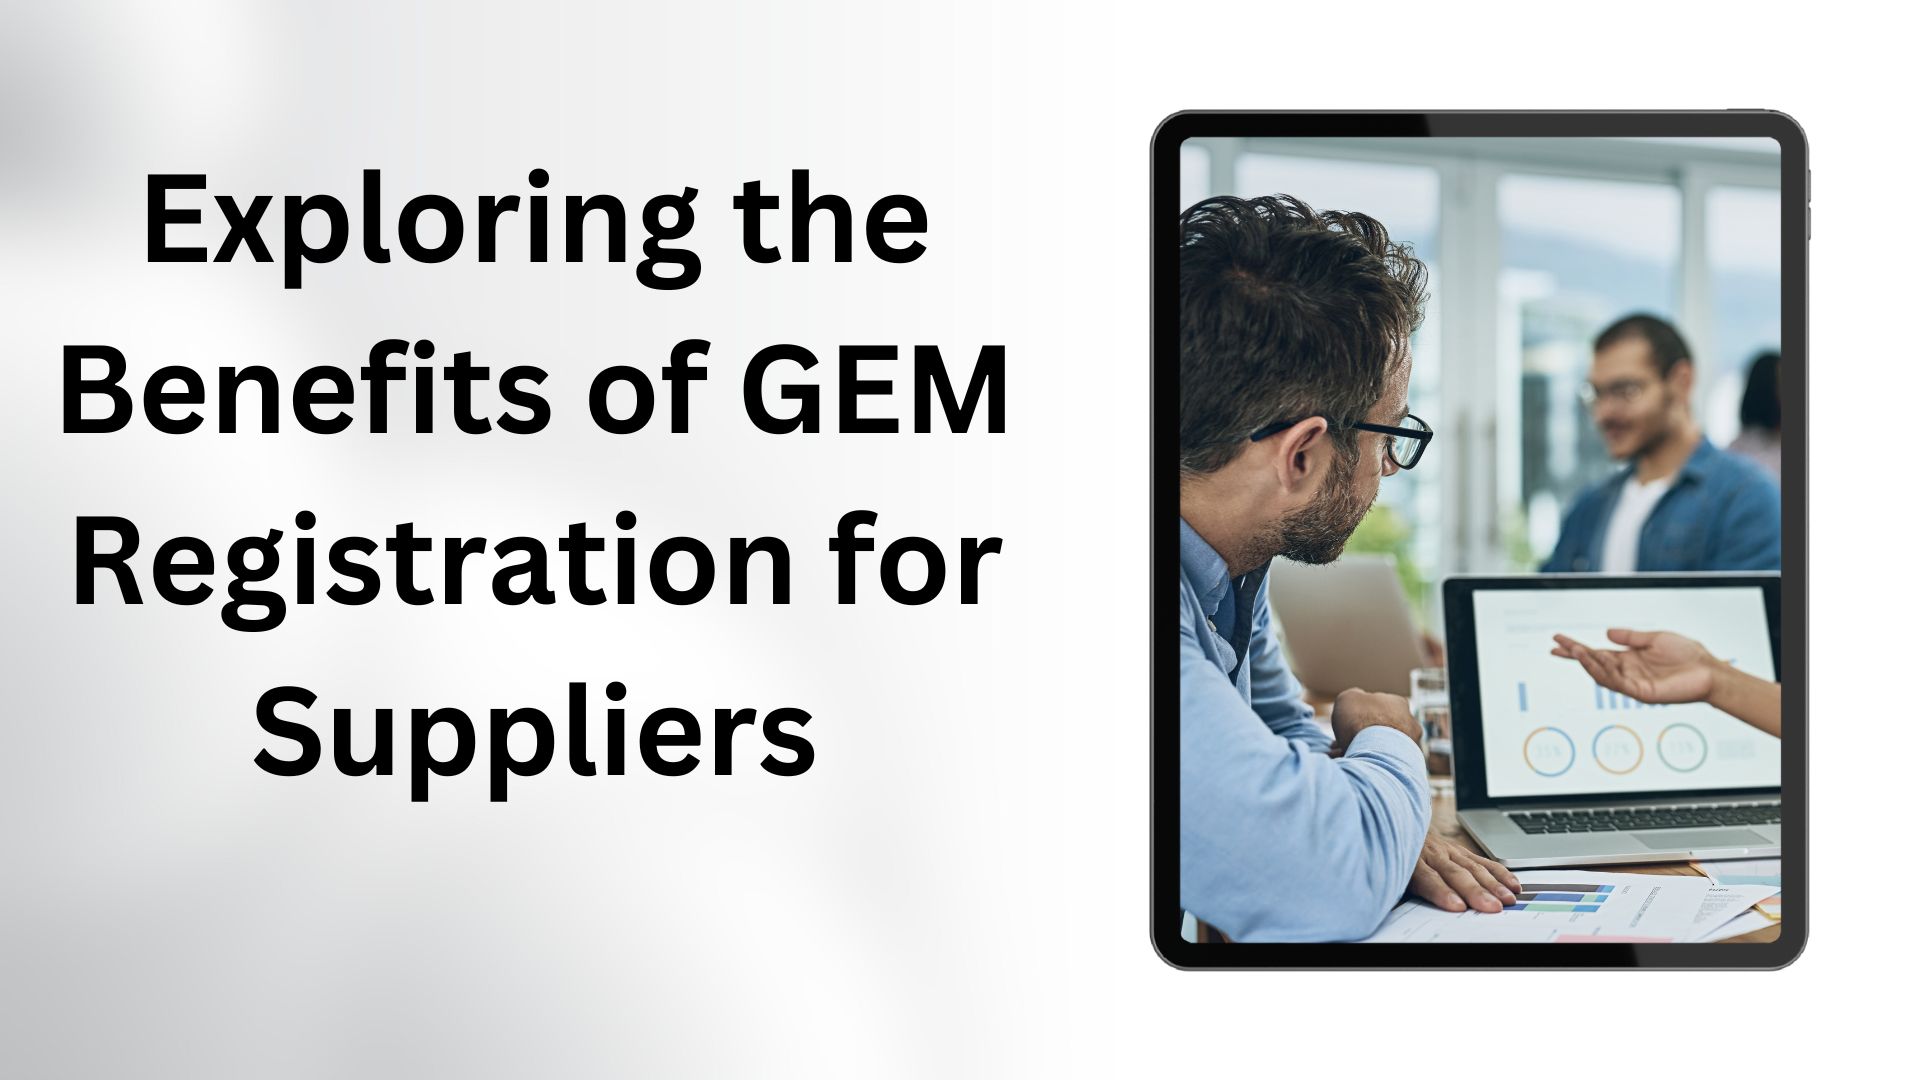 Exploring the Benefits of GEM Registration for Suppliers